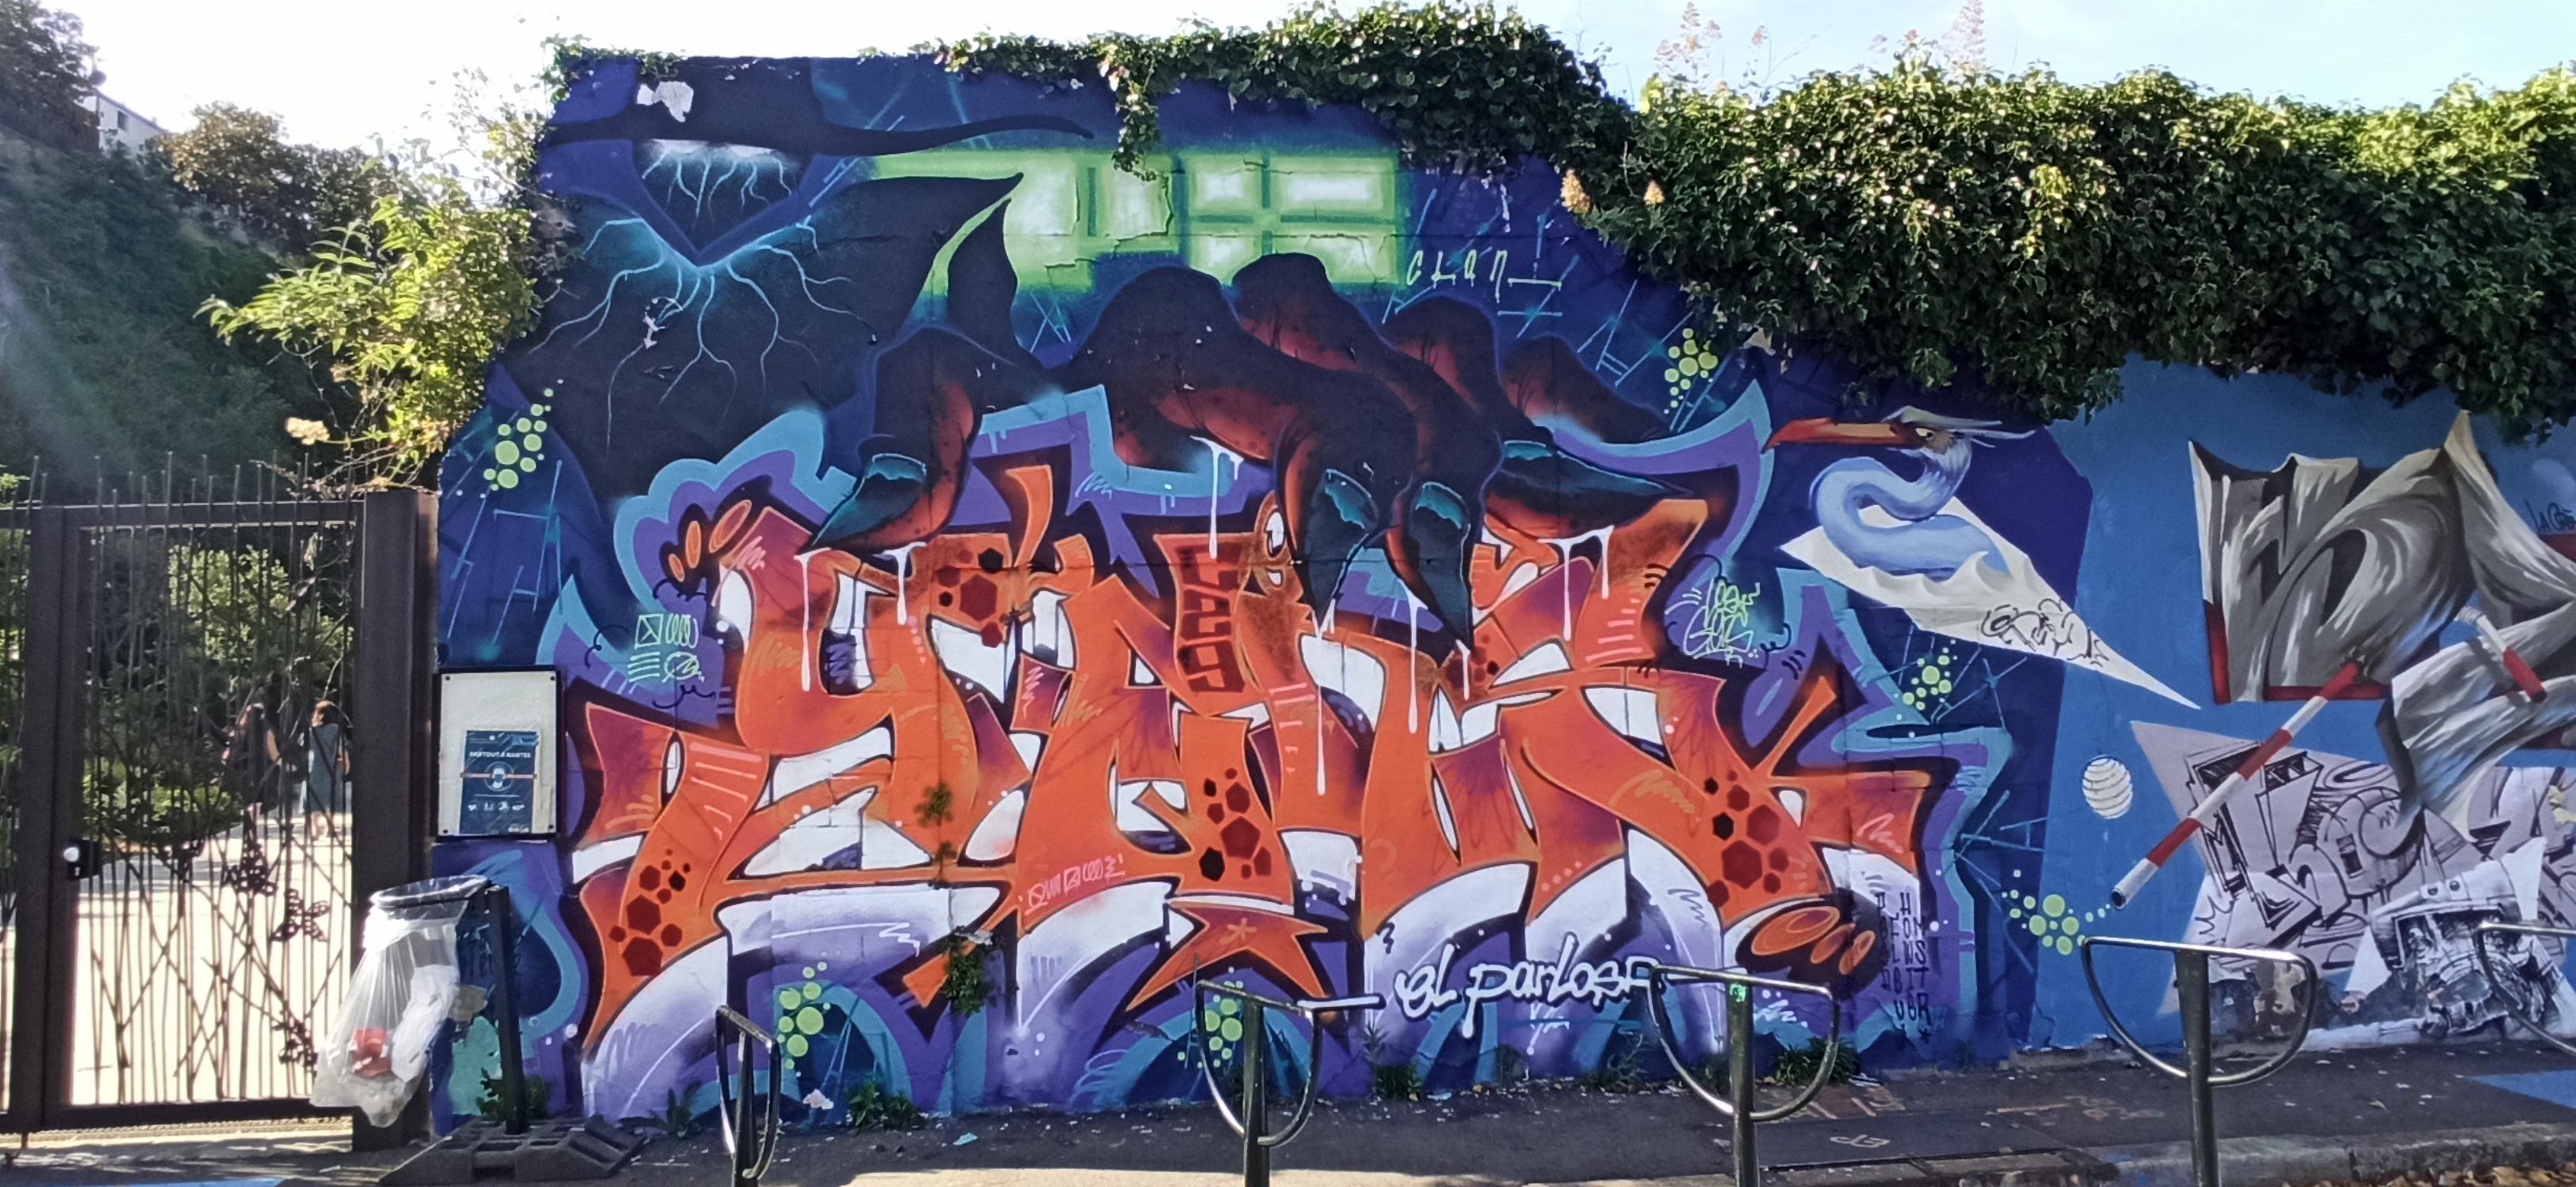 Graffiti 5119  captured by Rabot in Nantes France